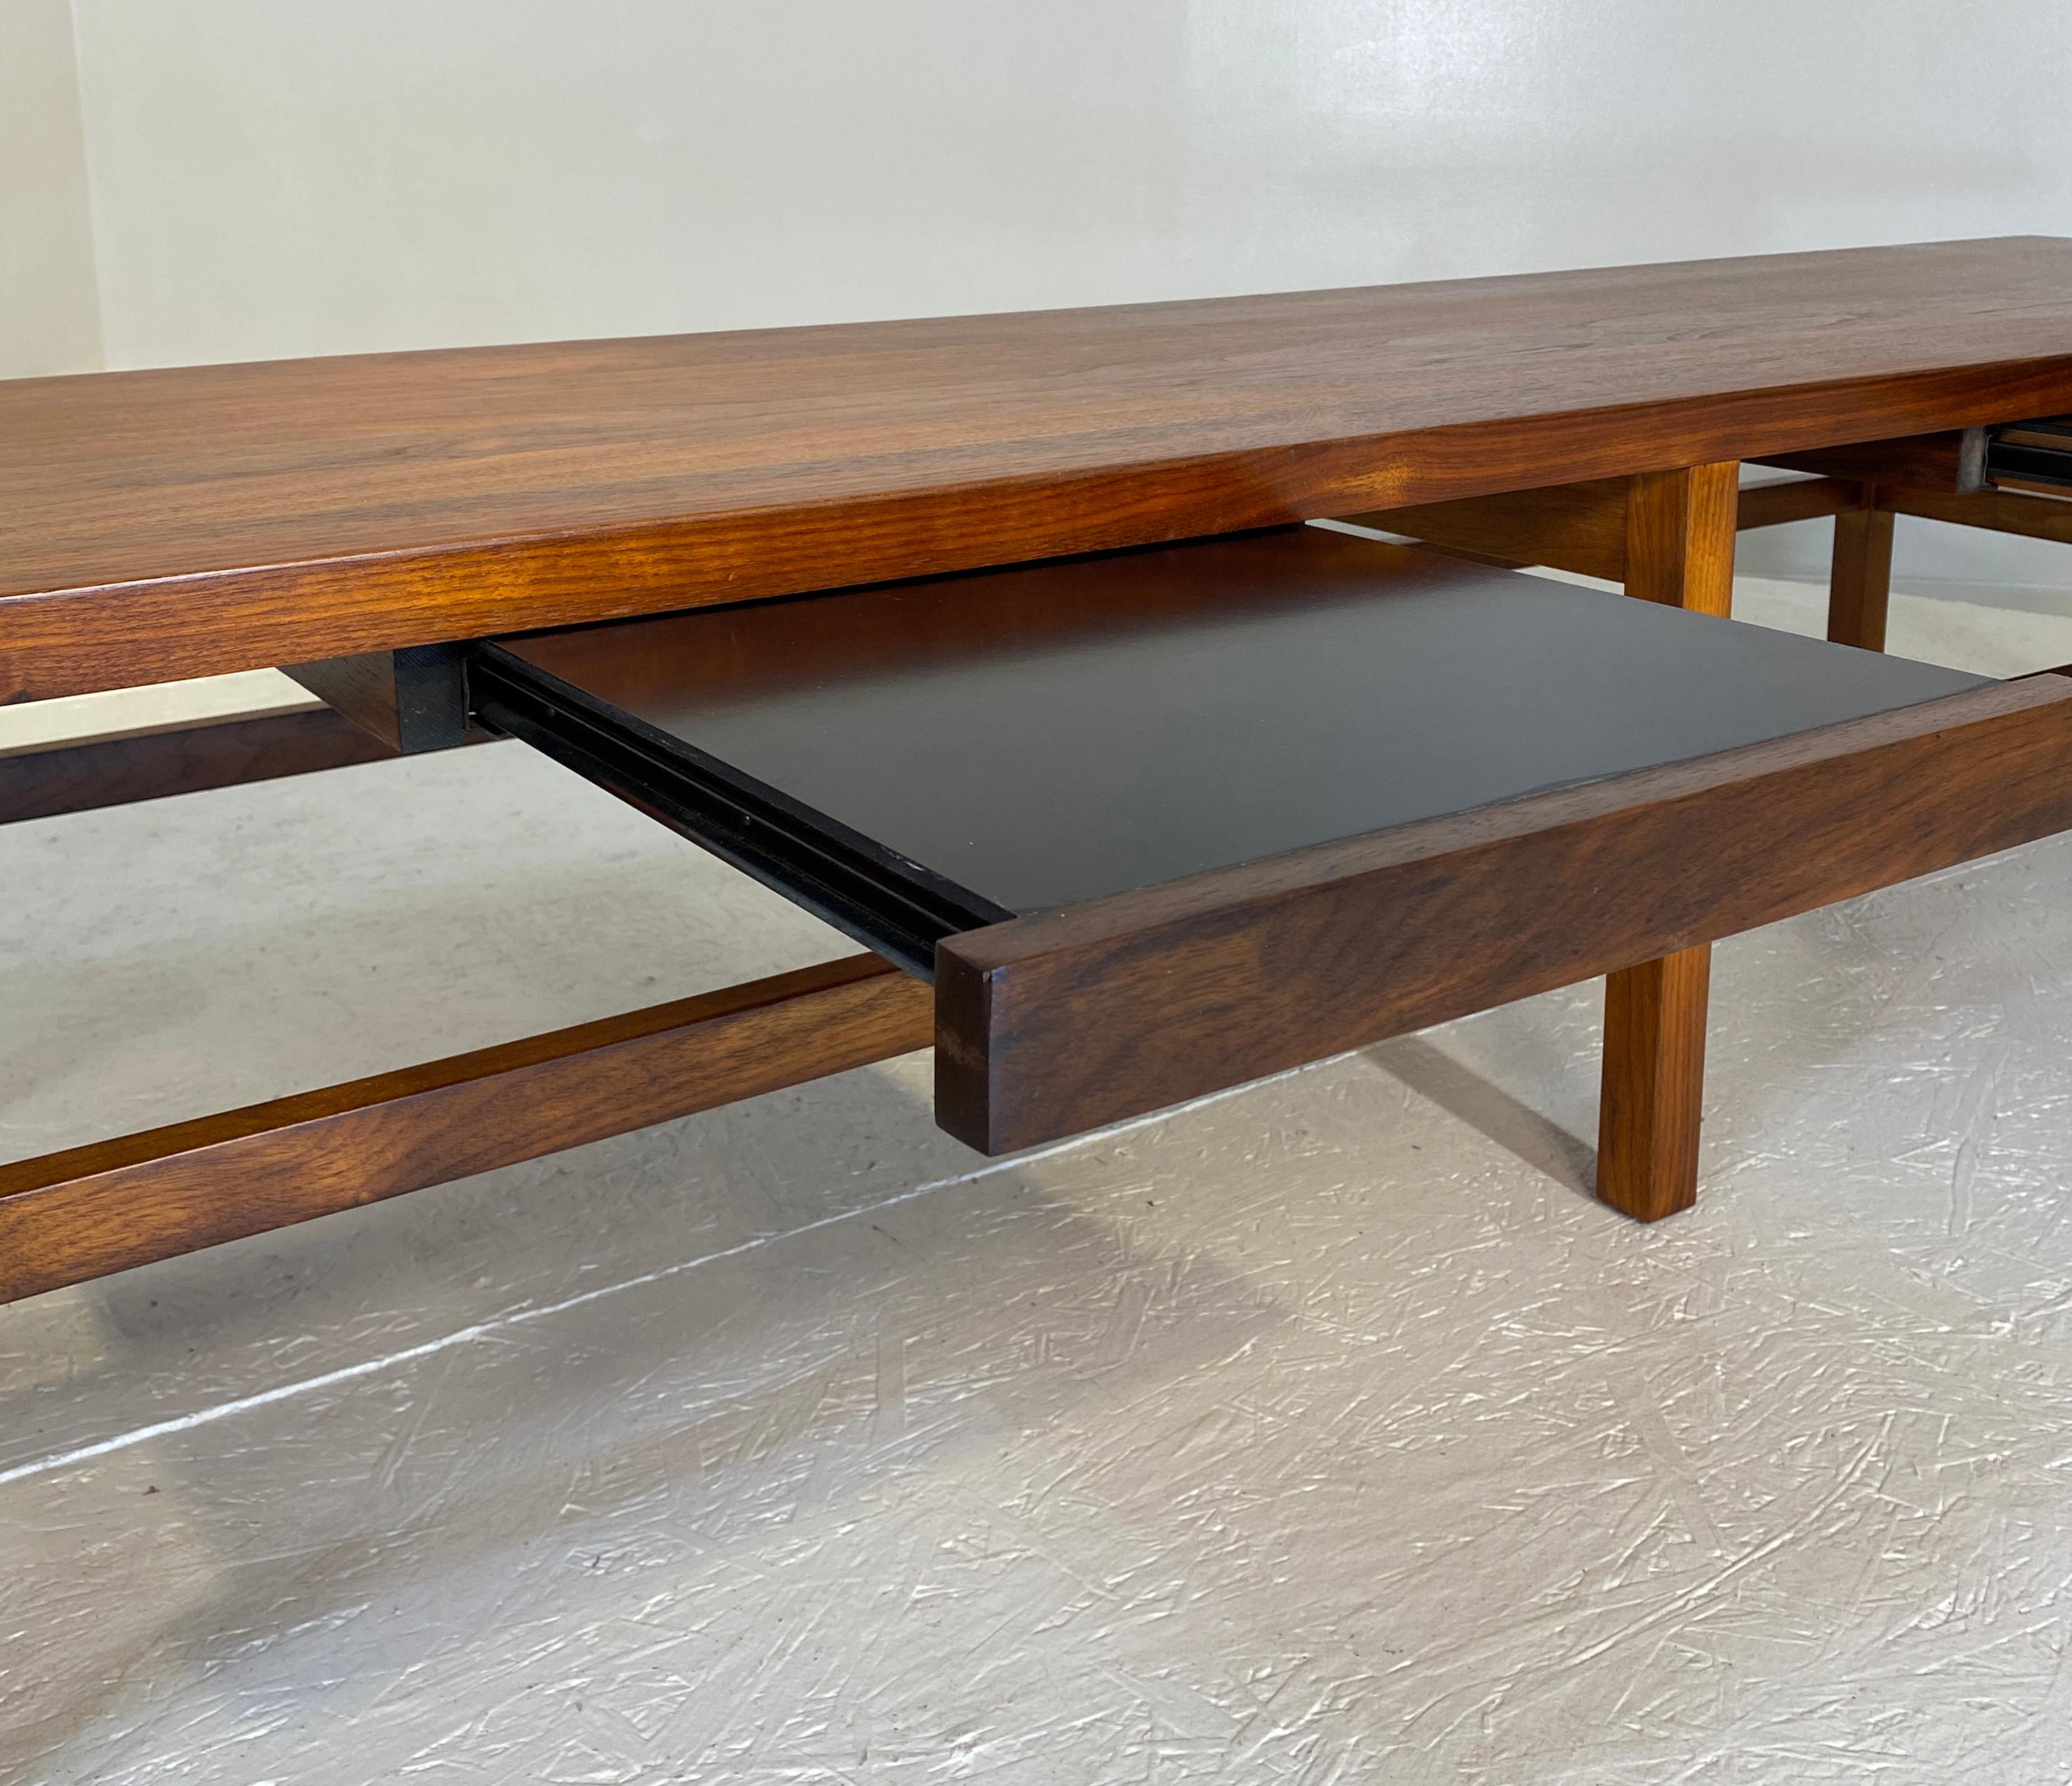 Monumental 9 Foot Cocktail Table or bench in Walnut In Excellent Condition For Sale In South Charleston, WV